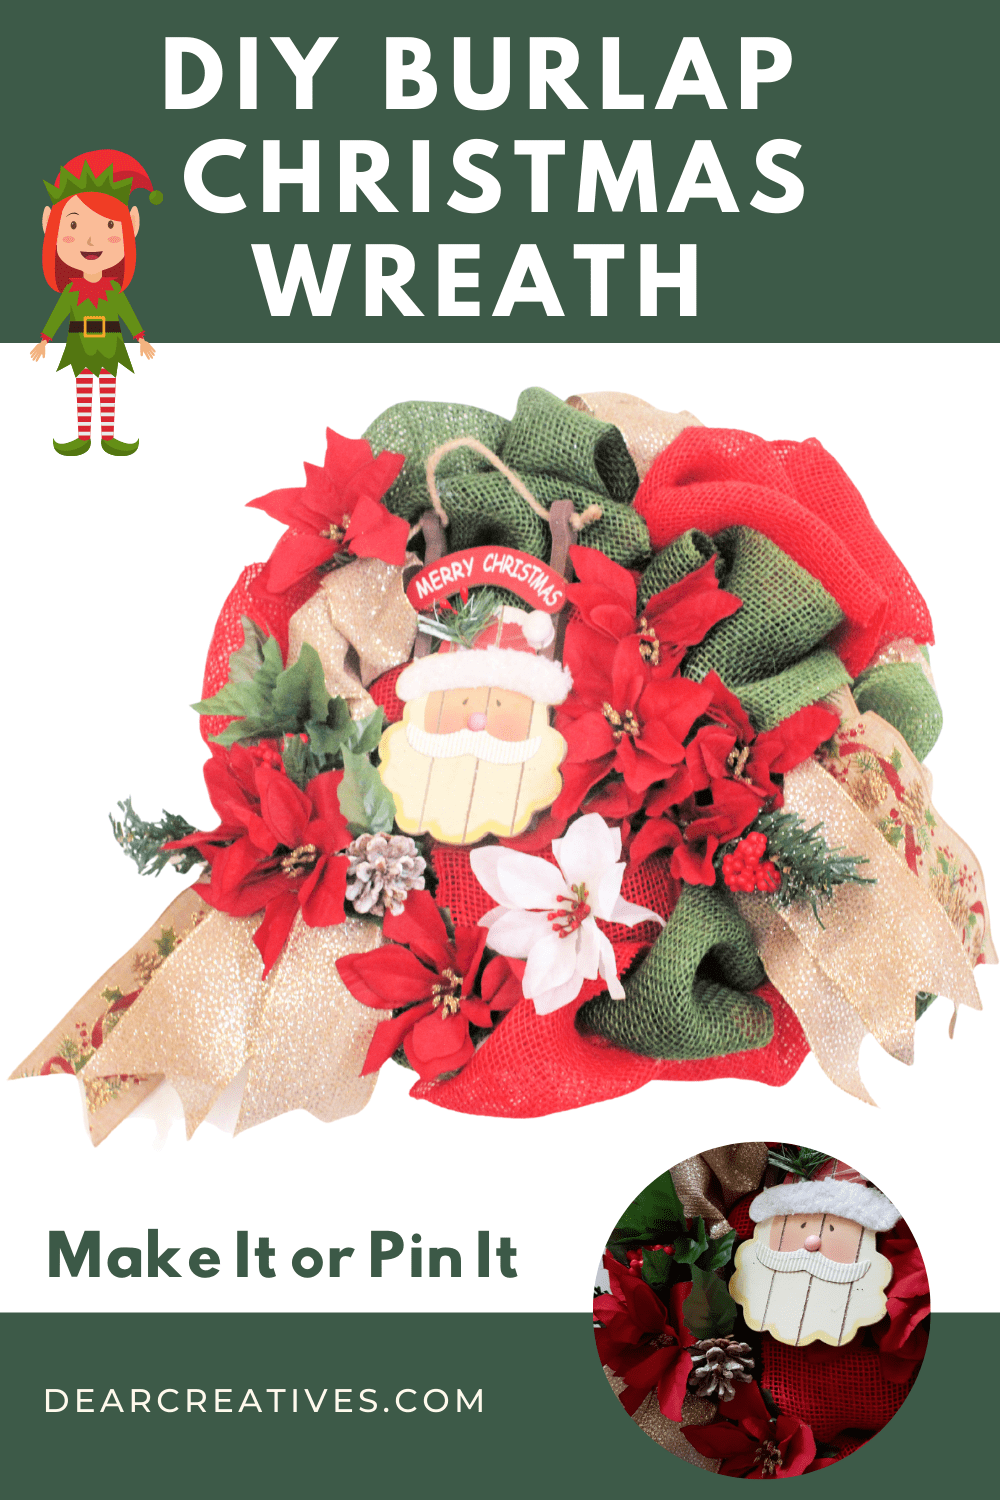 DIY Burlap Christmas Wreath + Tips and Resources